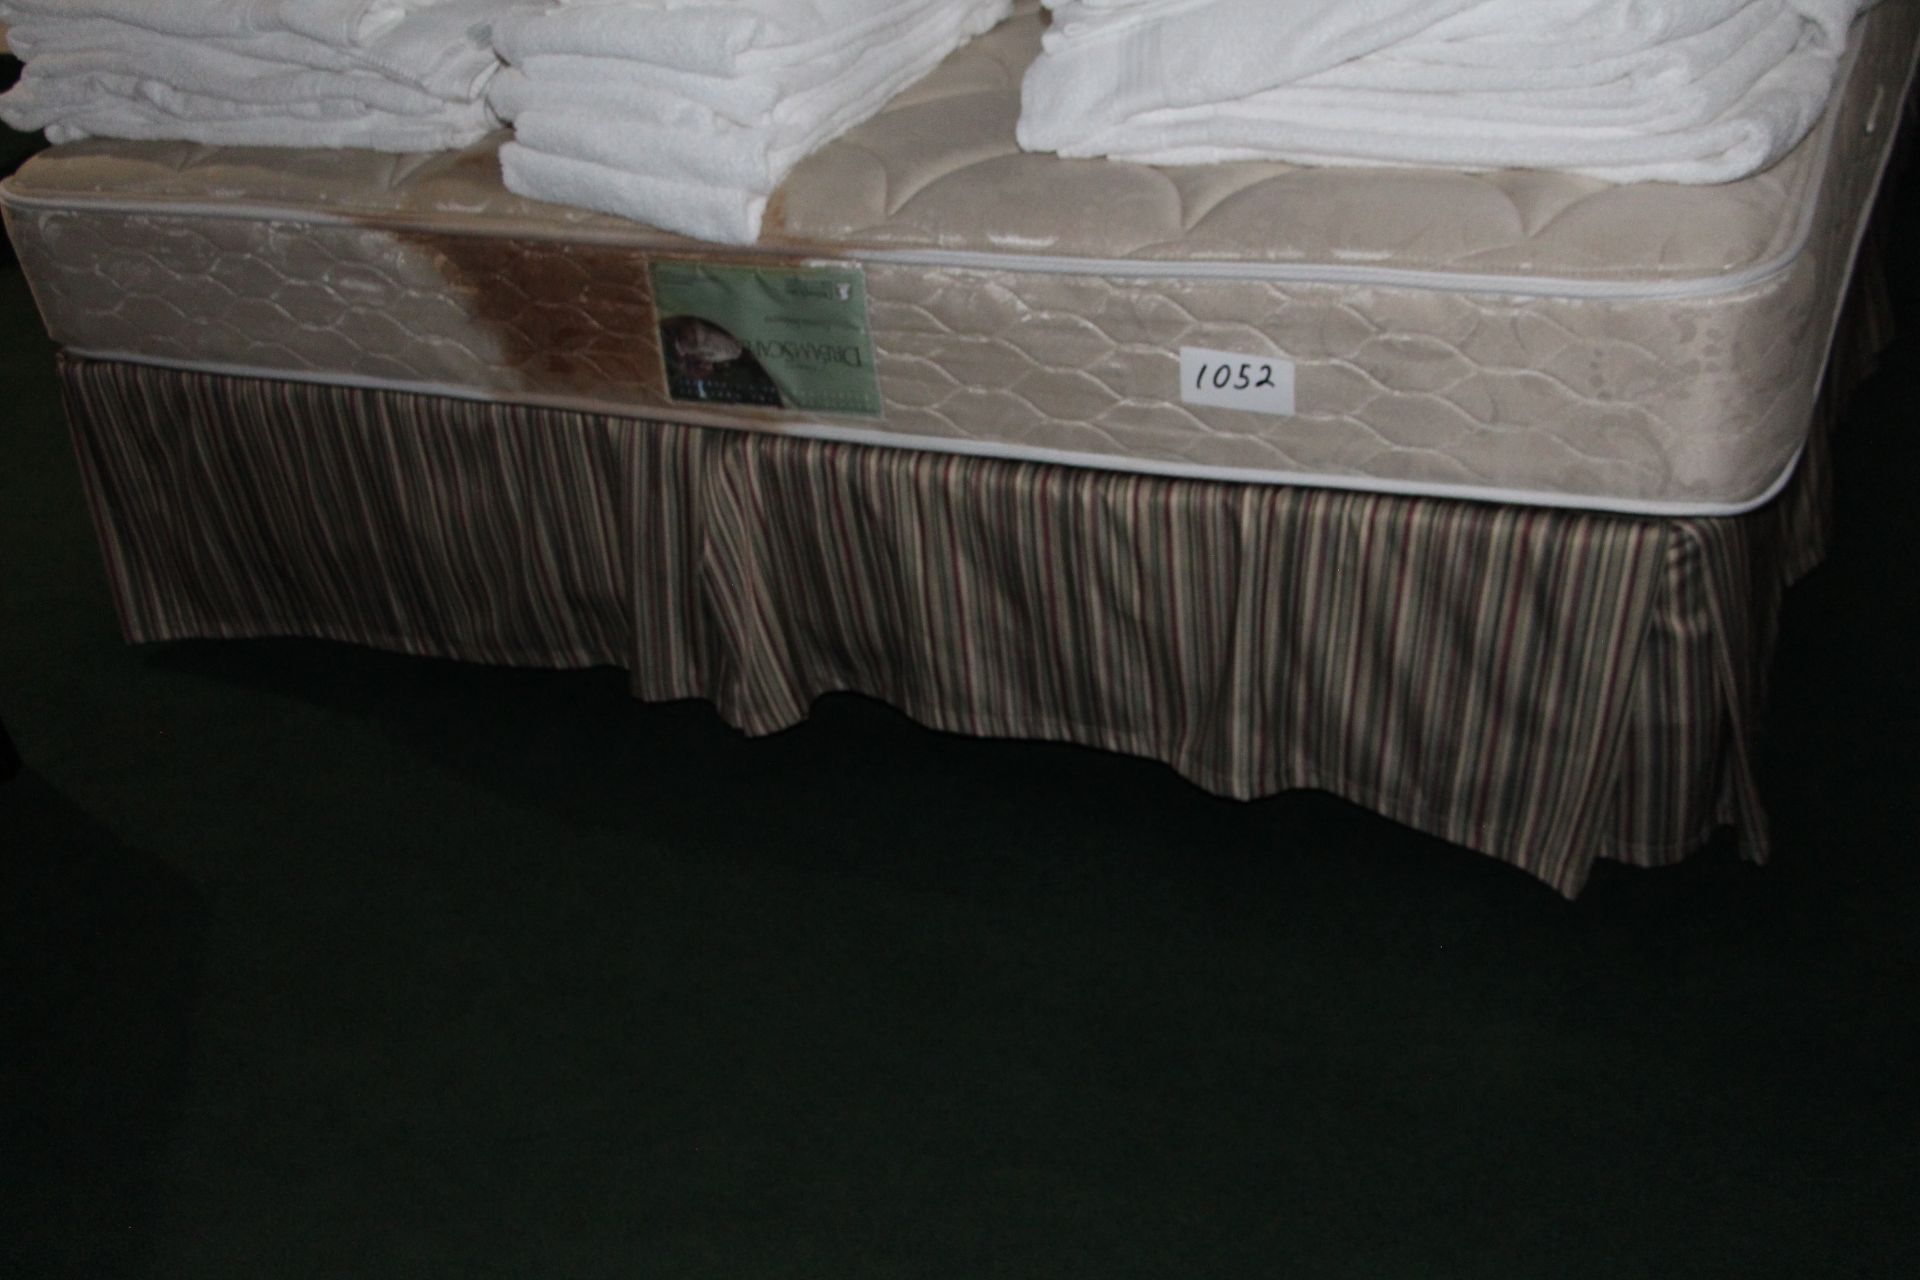 King size mattress with box spring, bed skirt and matching window drape